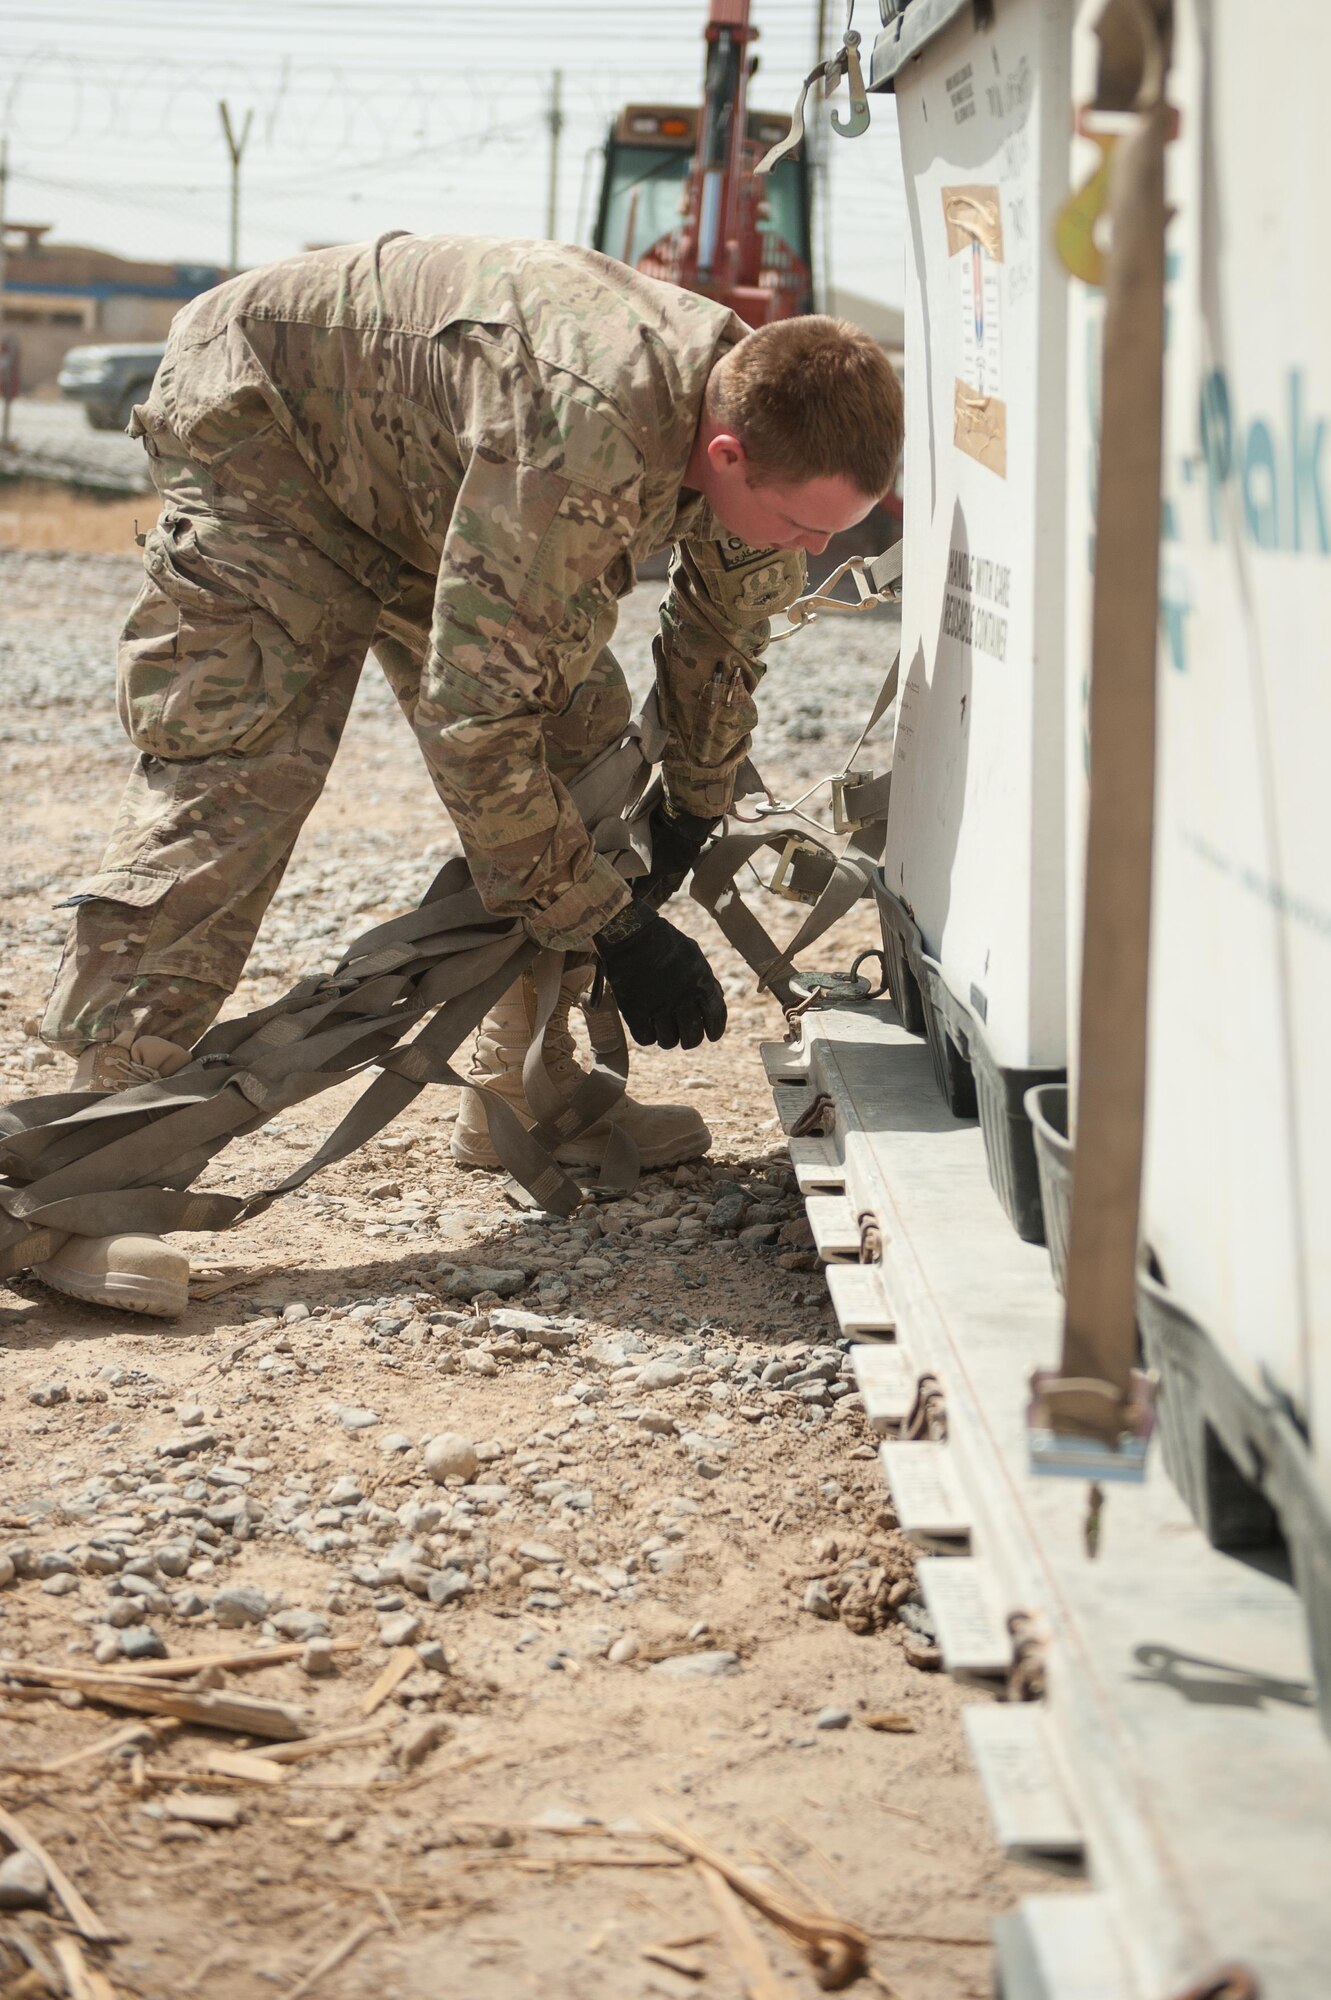 U.S. Air Force Staff Sgt. Cody Madison, 451st Expeditionary Support Squadron Central Command Material Recovery Element joint inspector, removes cargo straps from a pallet at Kandahar Airfield, Aug. 15, 2015. Madison is responsible for identifying, storing and redeploying assets to the U.S. or disposing of items located throughout Afghanistan. (U.S. Air Force photo by Tech. Sgt. Joseph Swafford/Released)